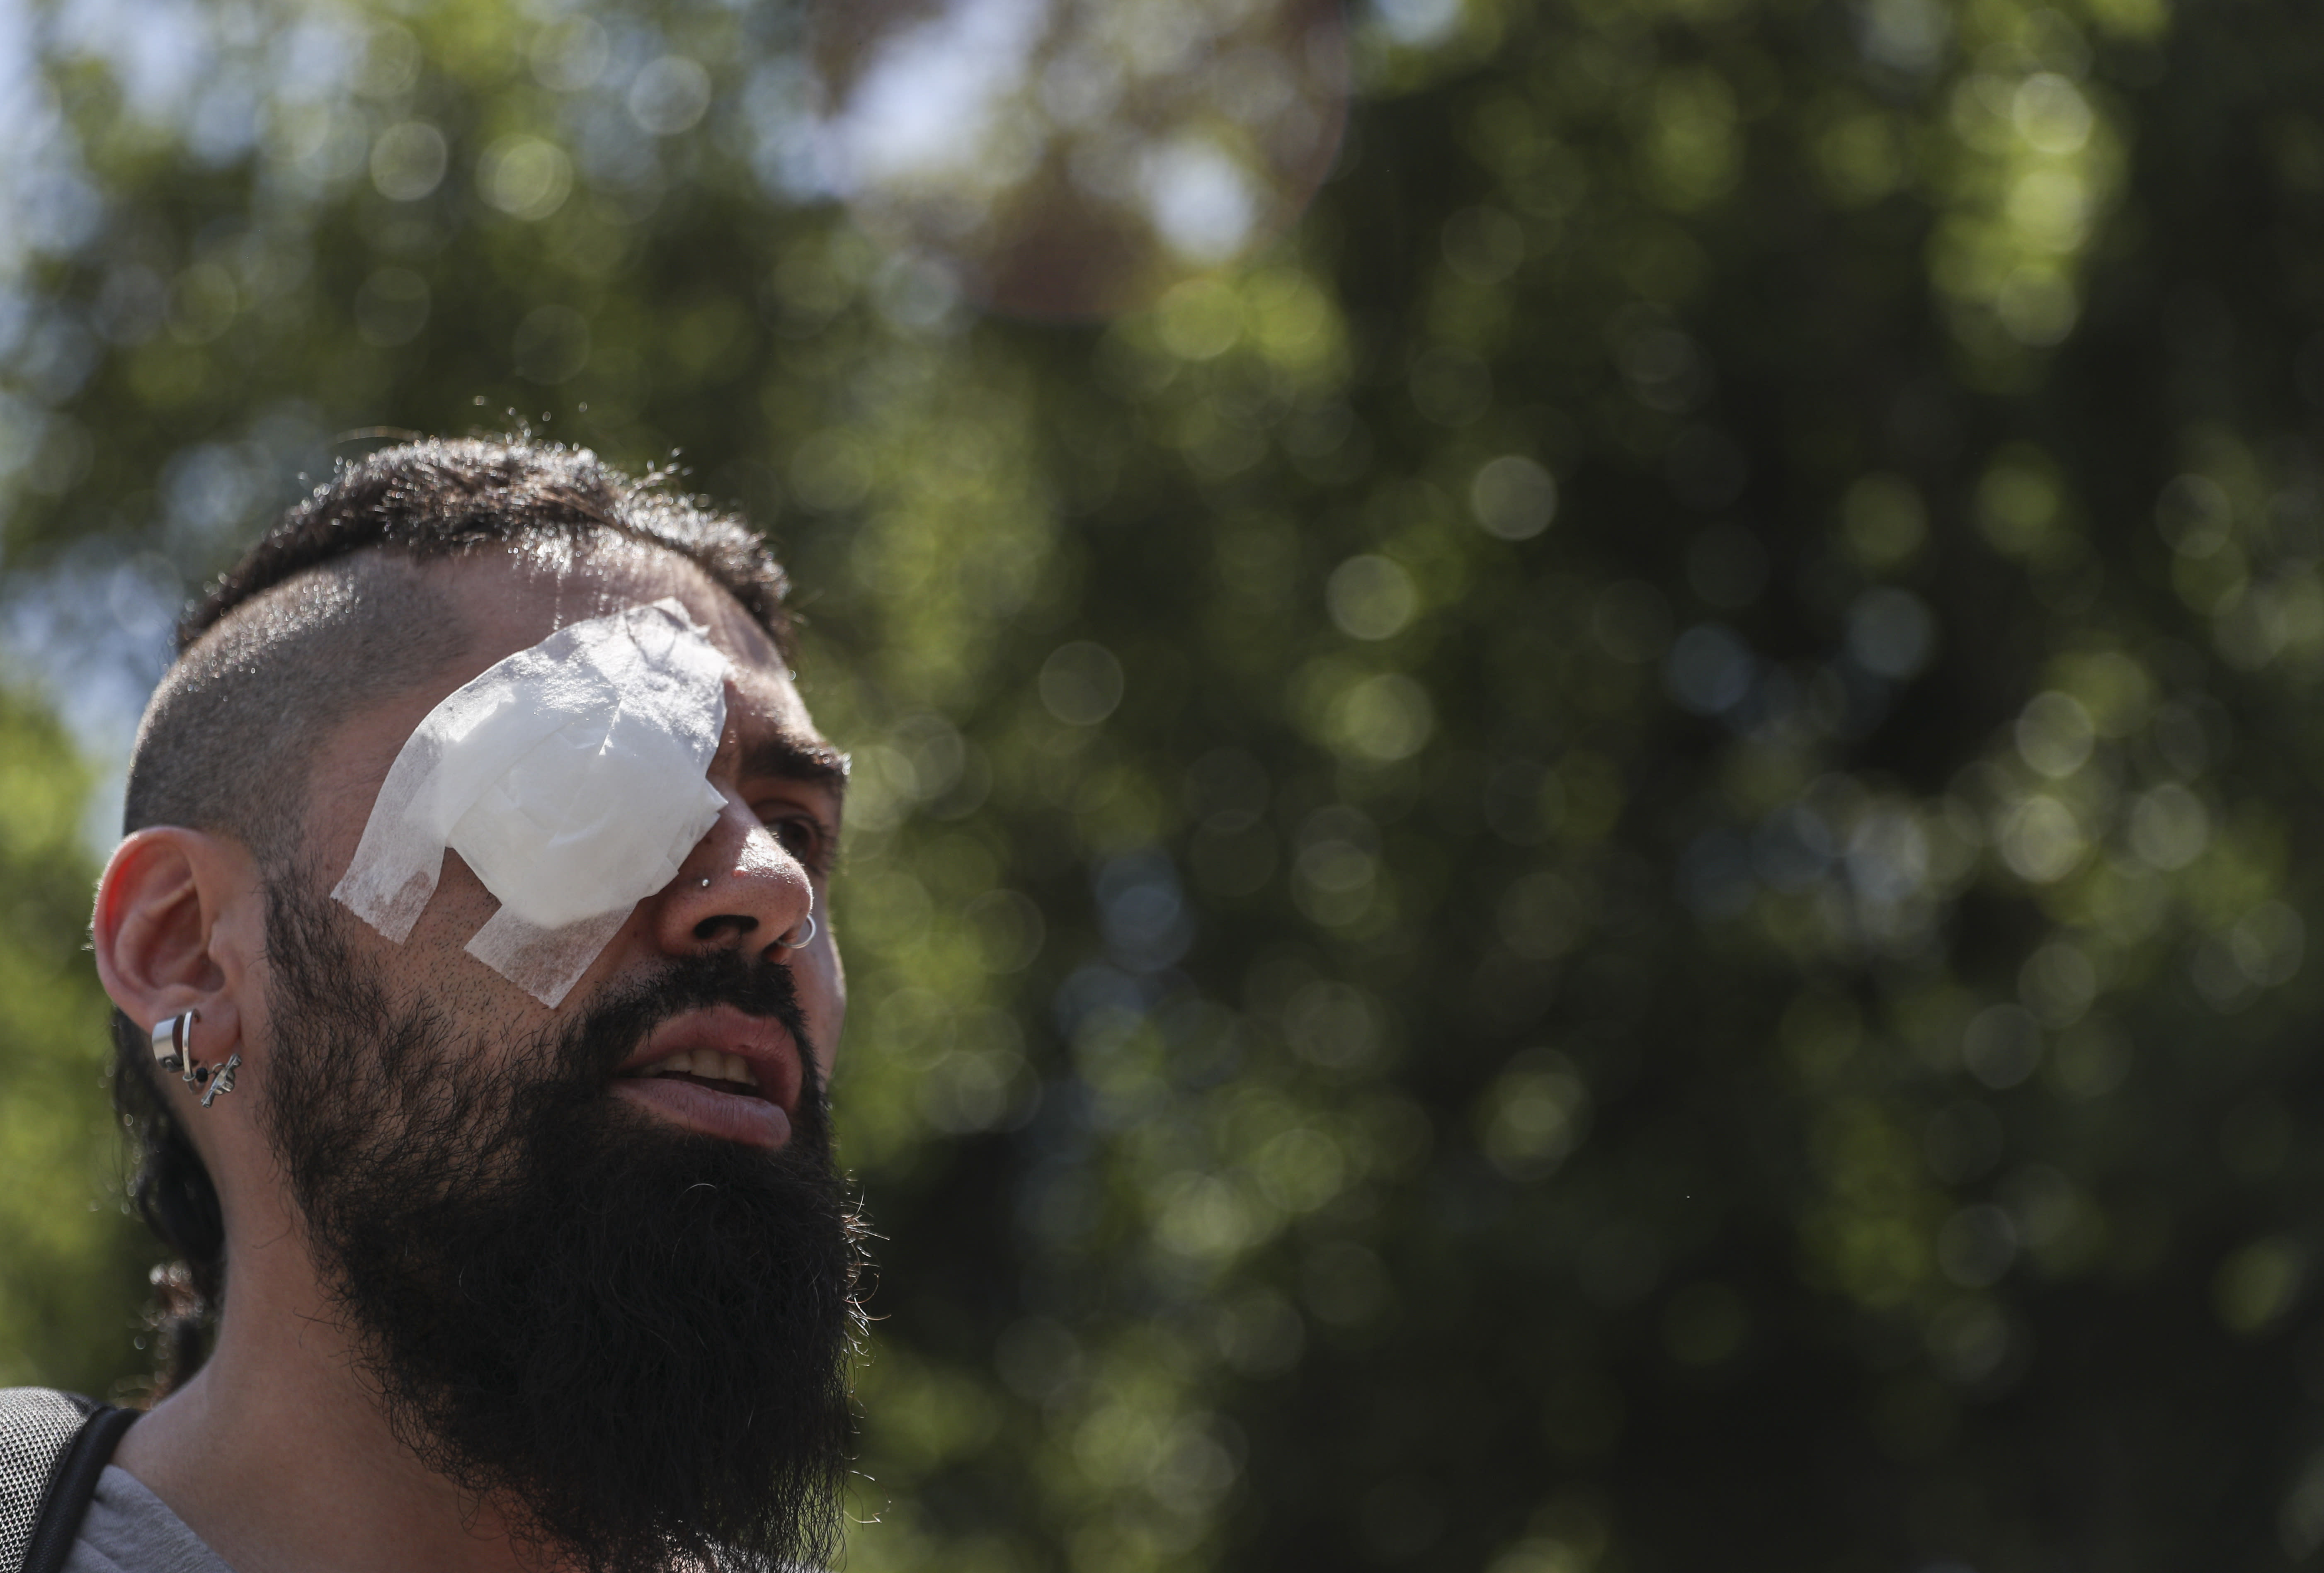 Marcelo Herrera, his eye bandaged from an injury he received during recent protests, takes part in a demonstration in support of protesters who have been injured in the eye by Chilean police, in Santiago, Chile, Thursday, Nov. 28, 2019. More than 230 anti-government protesters have suffered an eye injury since the social unrest began on Oct. 18. (AP Photo/Esteban Felix)